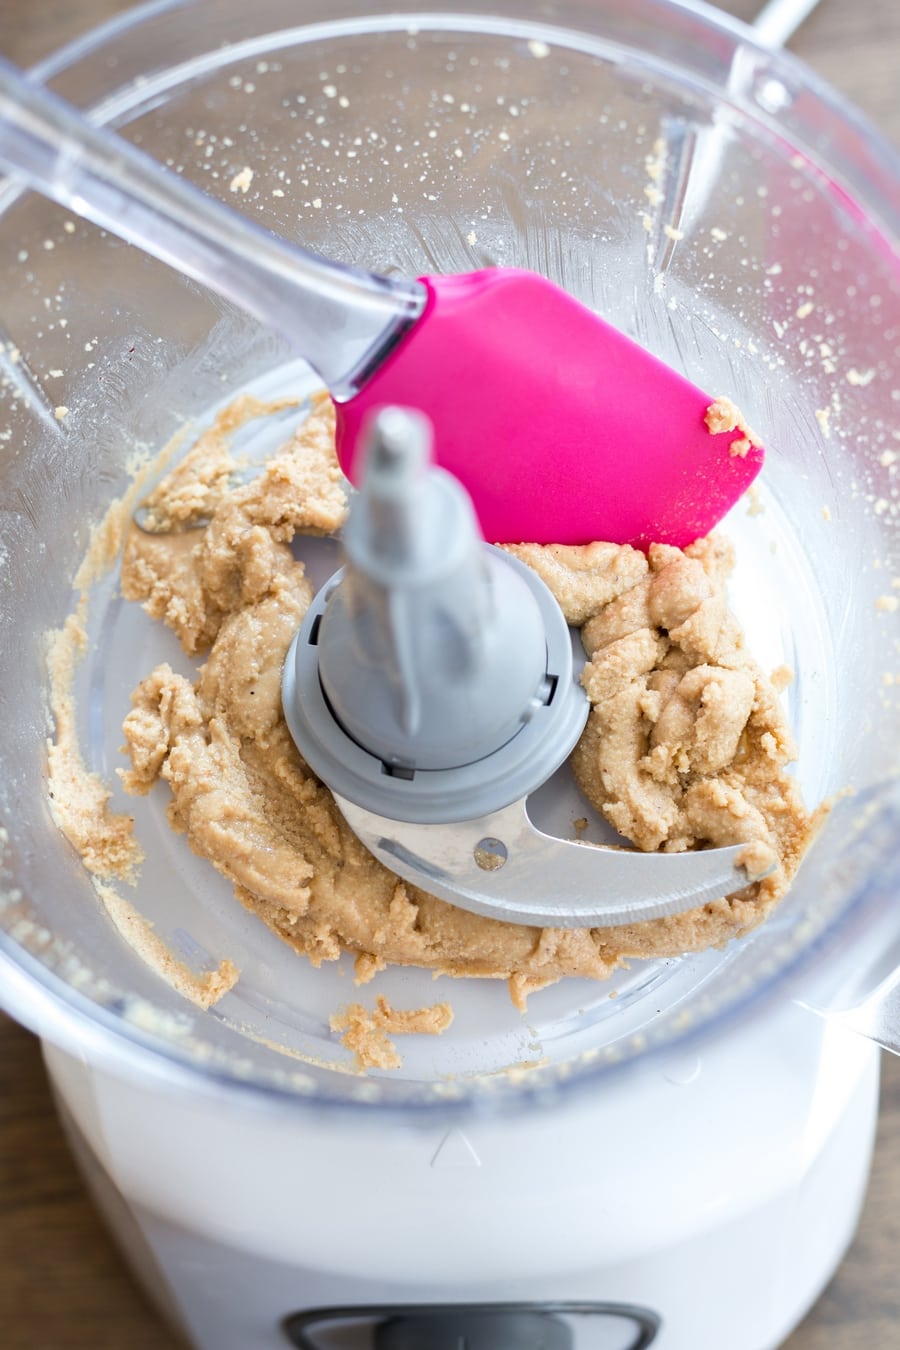 Pink spatula scraping hazelnut paste down the sides of a food processor.